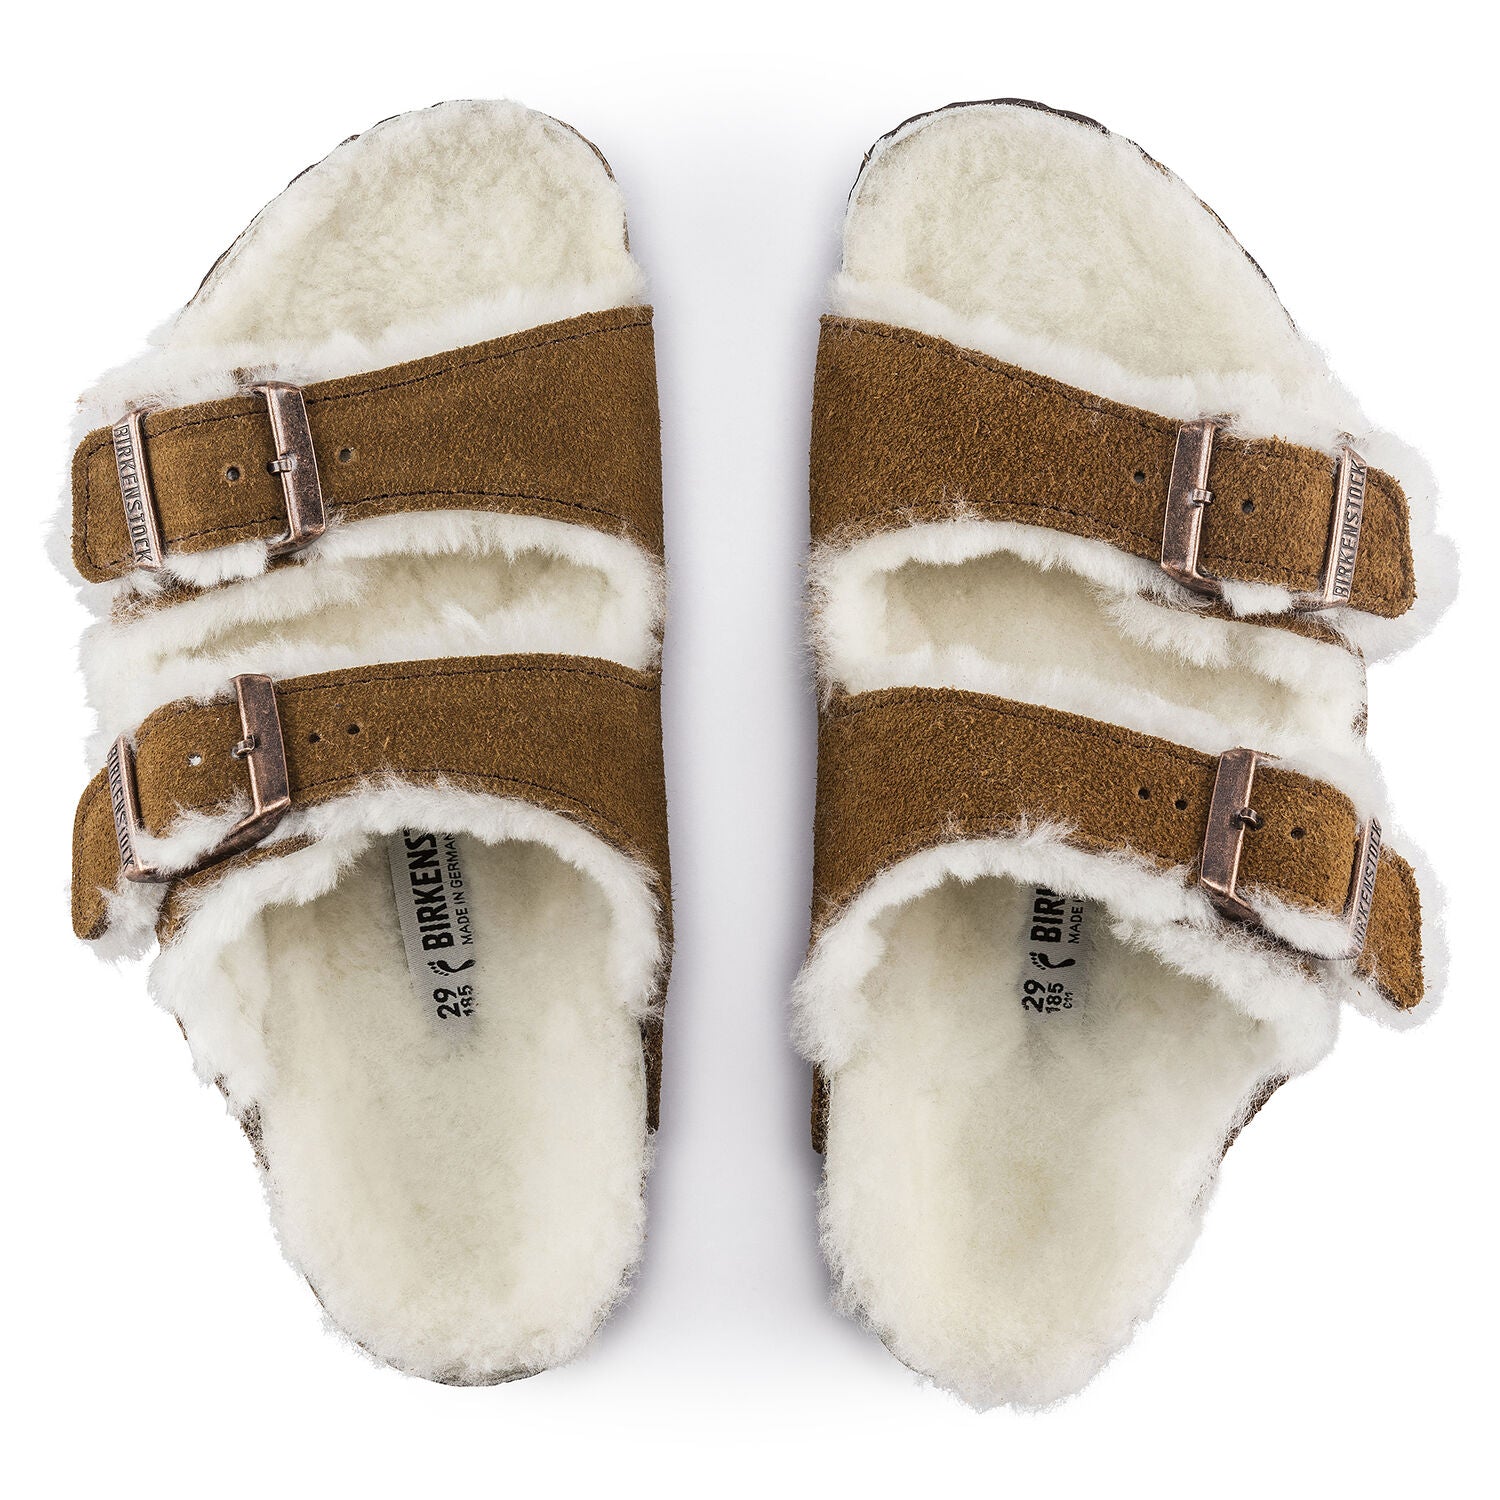 Adult Arizona Shearling Suede Leather Slipper - Mink